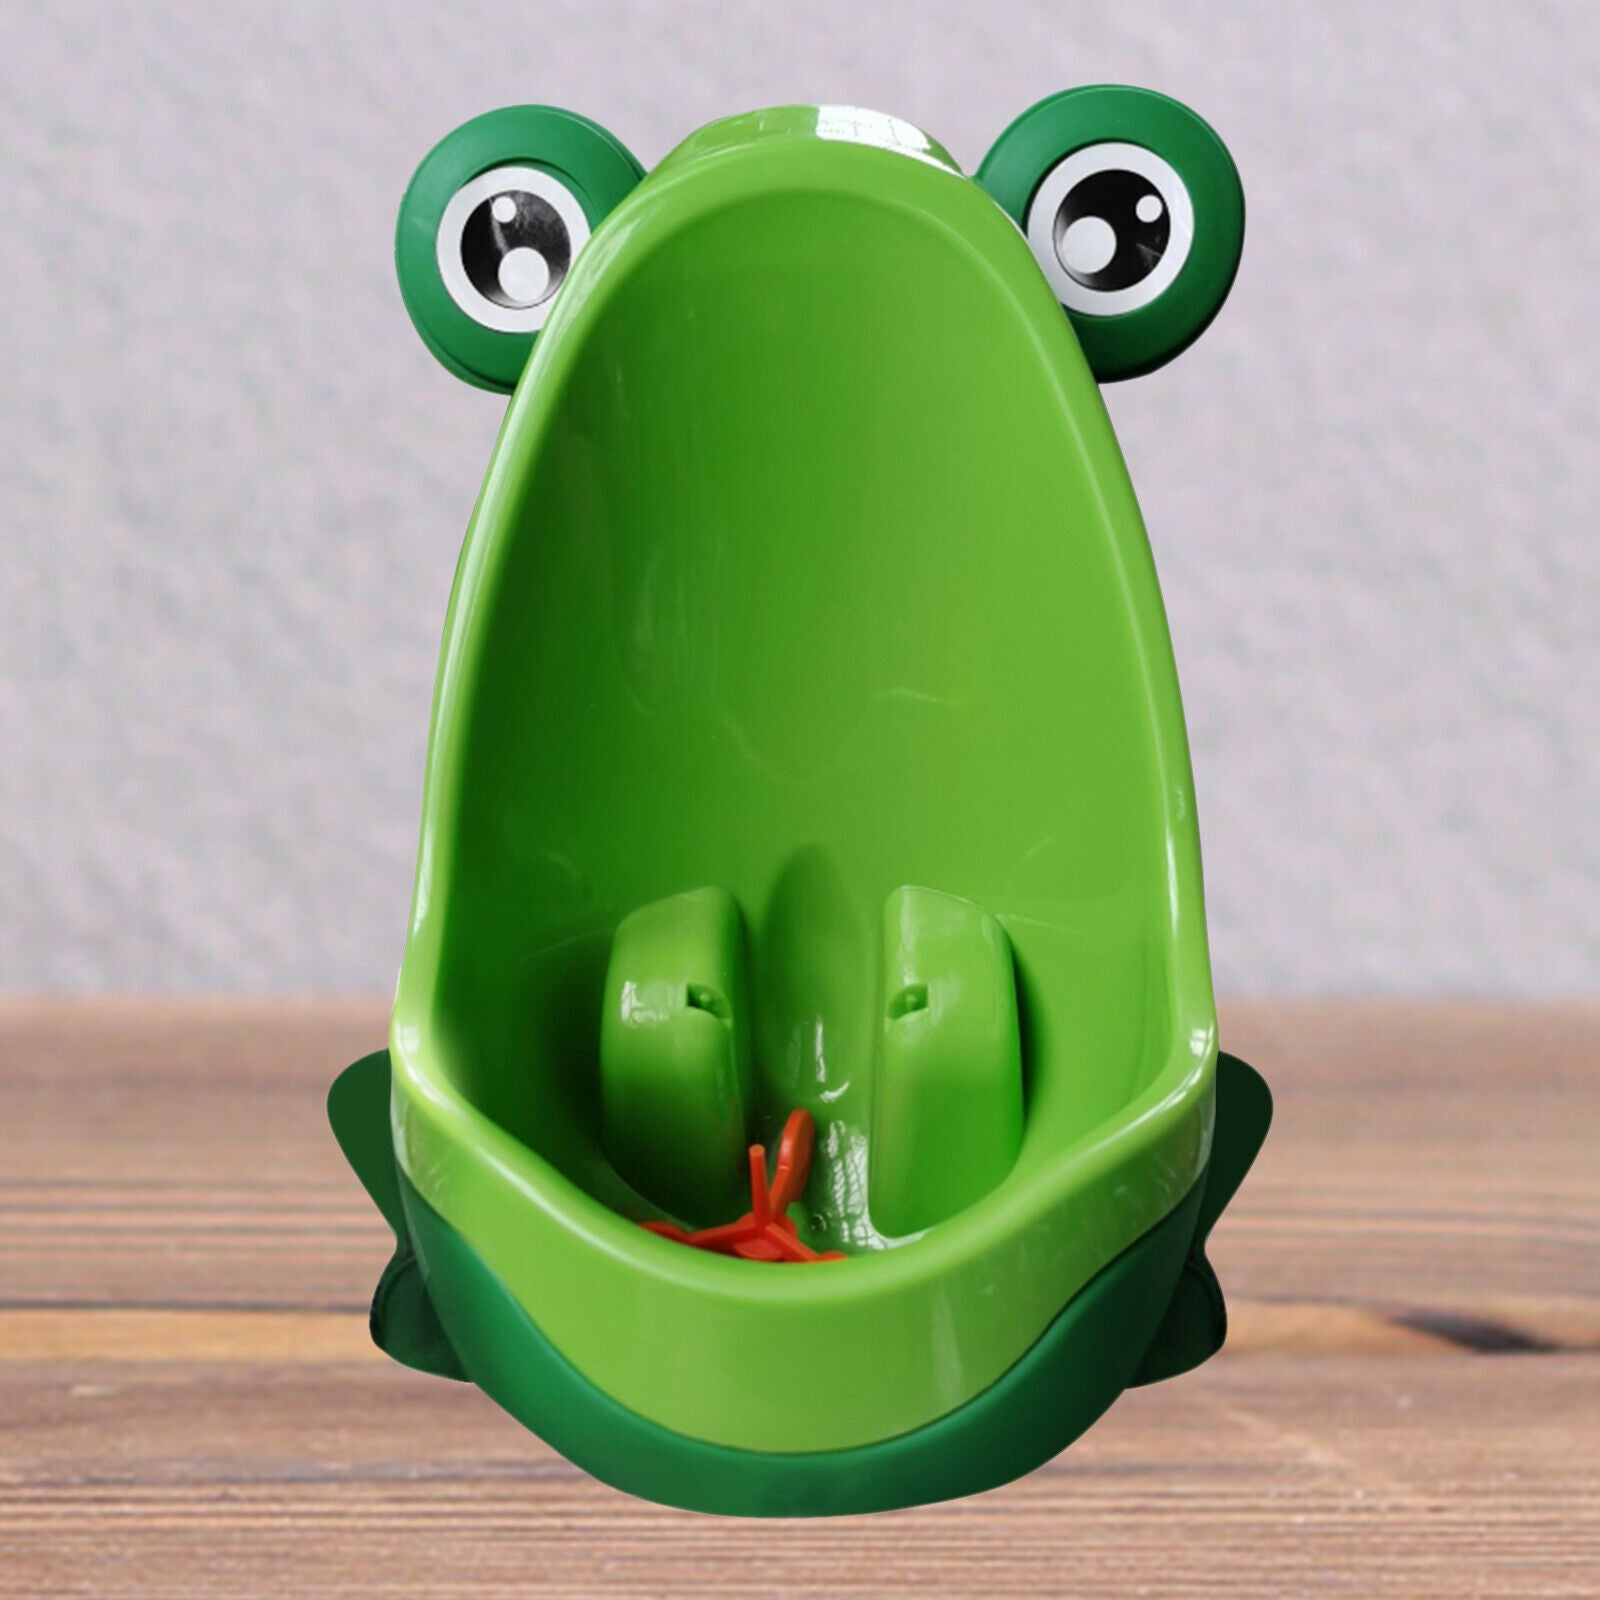 Lightweight Potty Trainer Urinal Wall-mounted for Boys Accessories Green